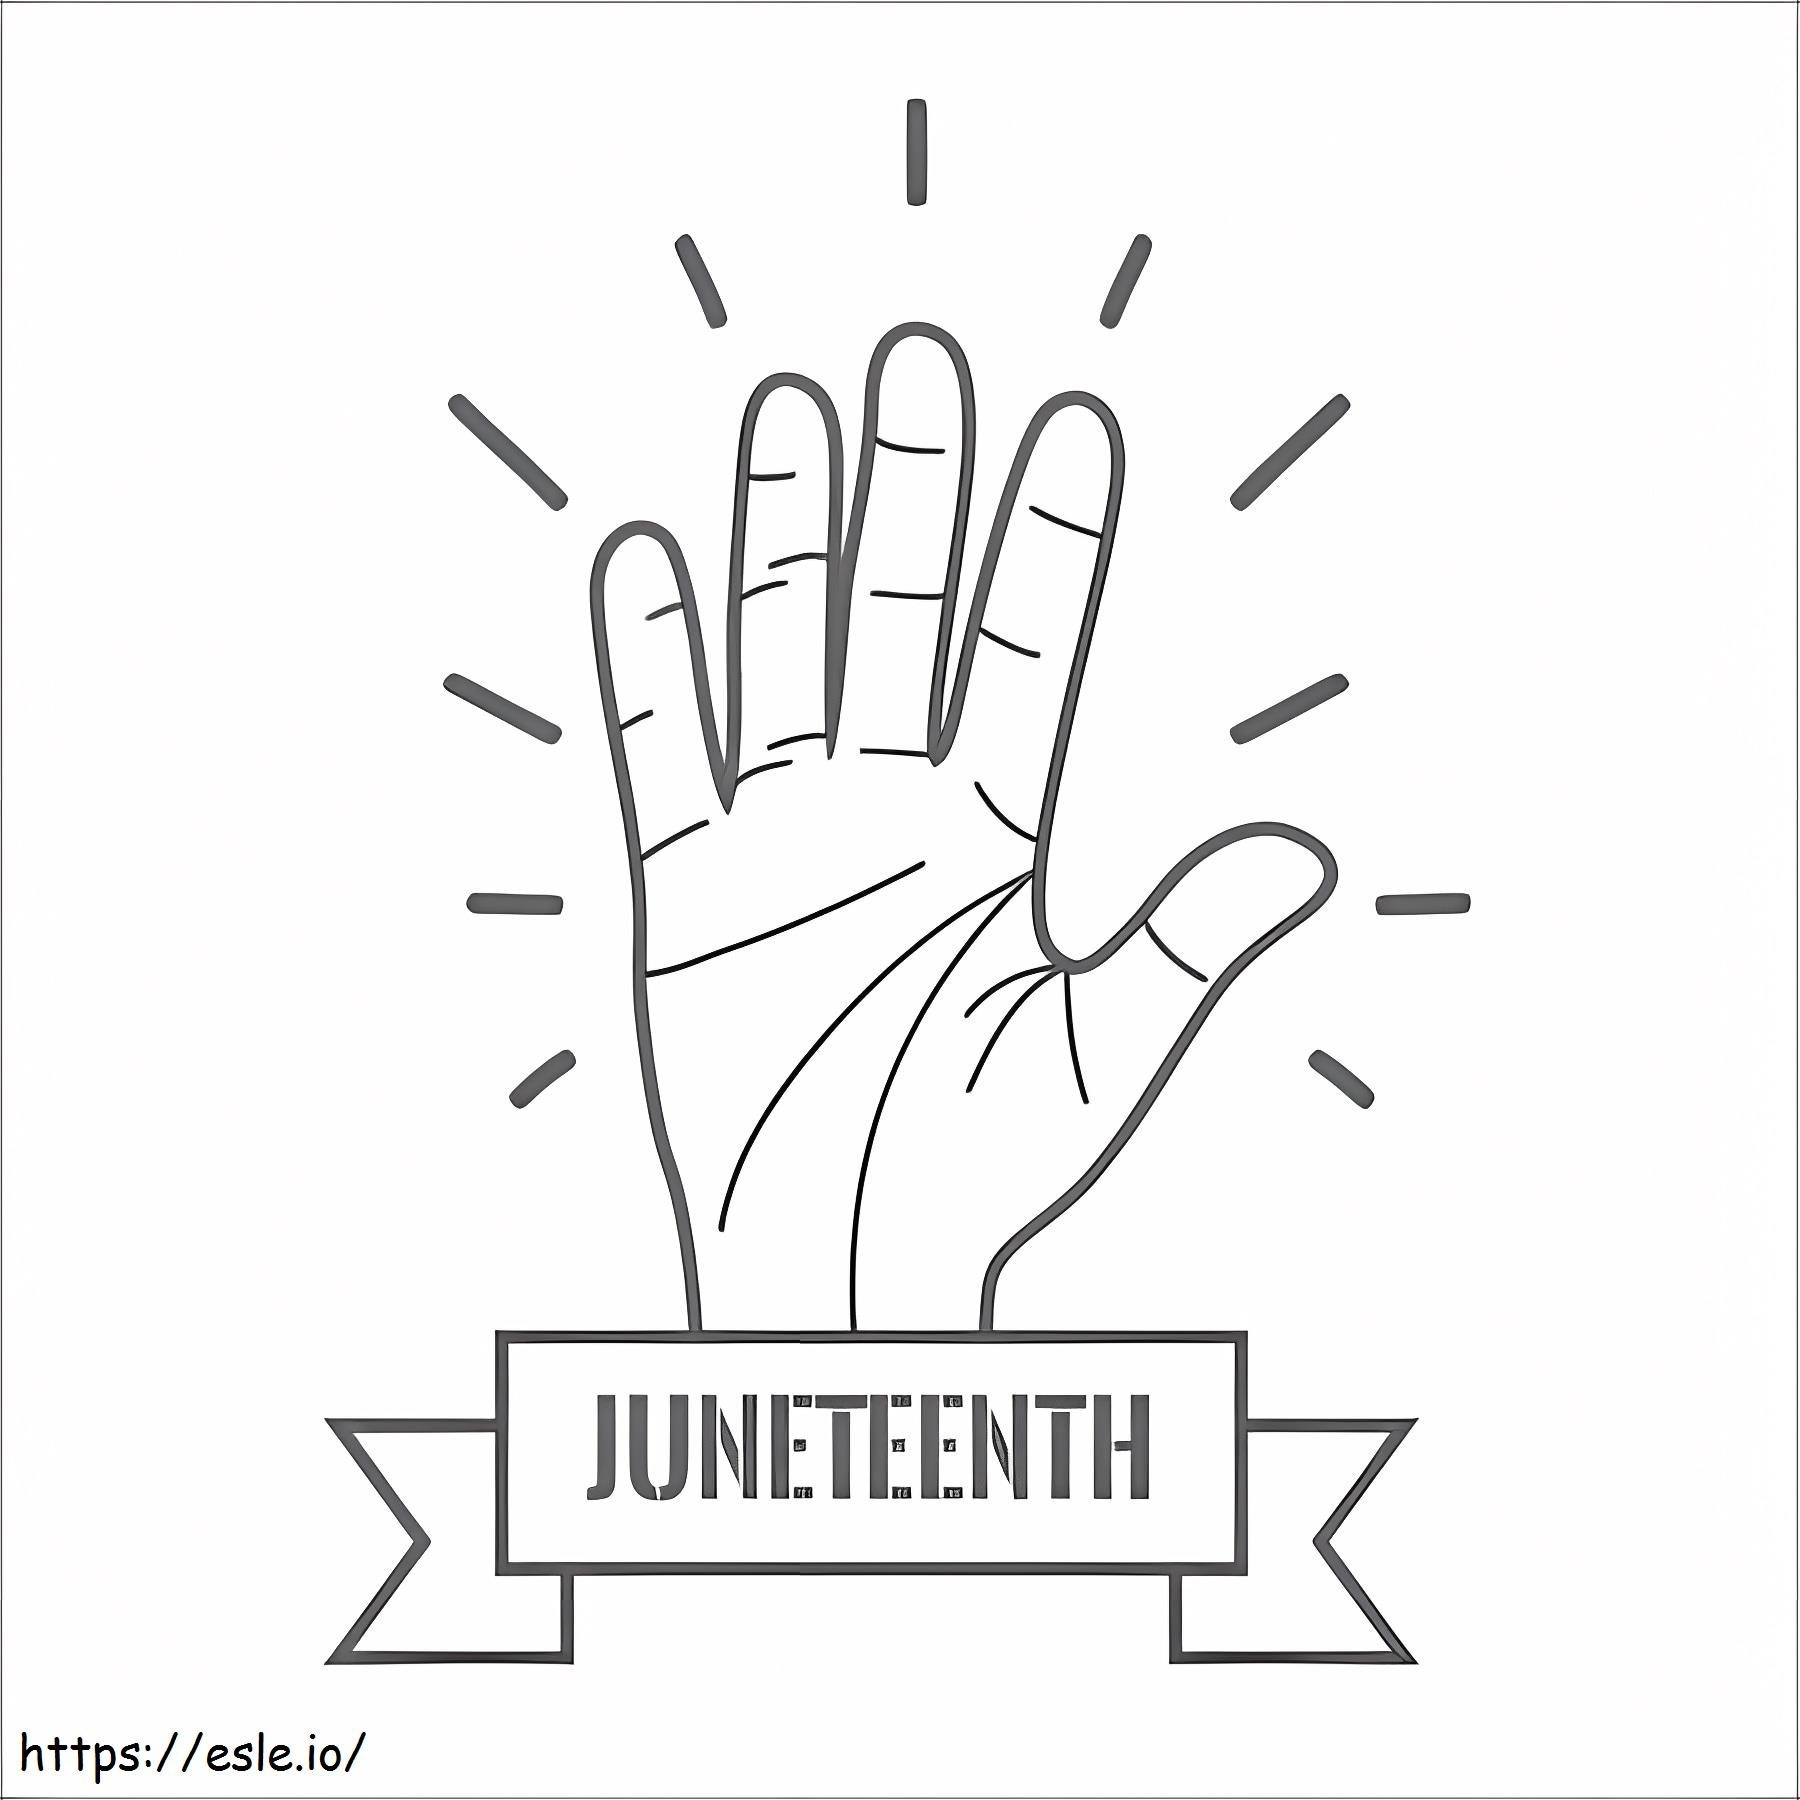 Juneteenth 1 coloring page